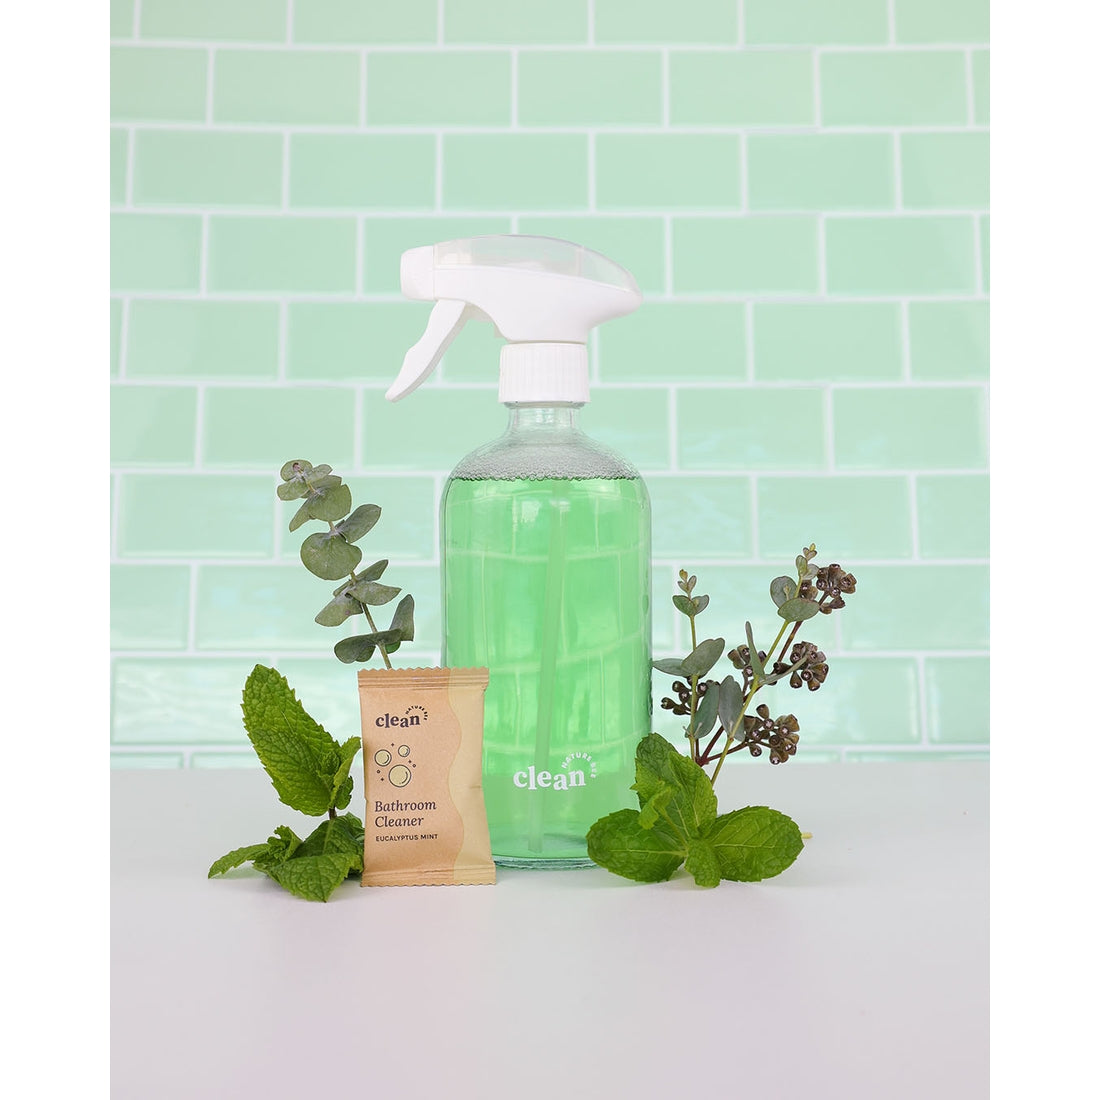 Eucalyptus Mint Bathroom Cleaner Refill Cleaning Tablets